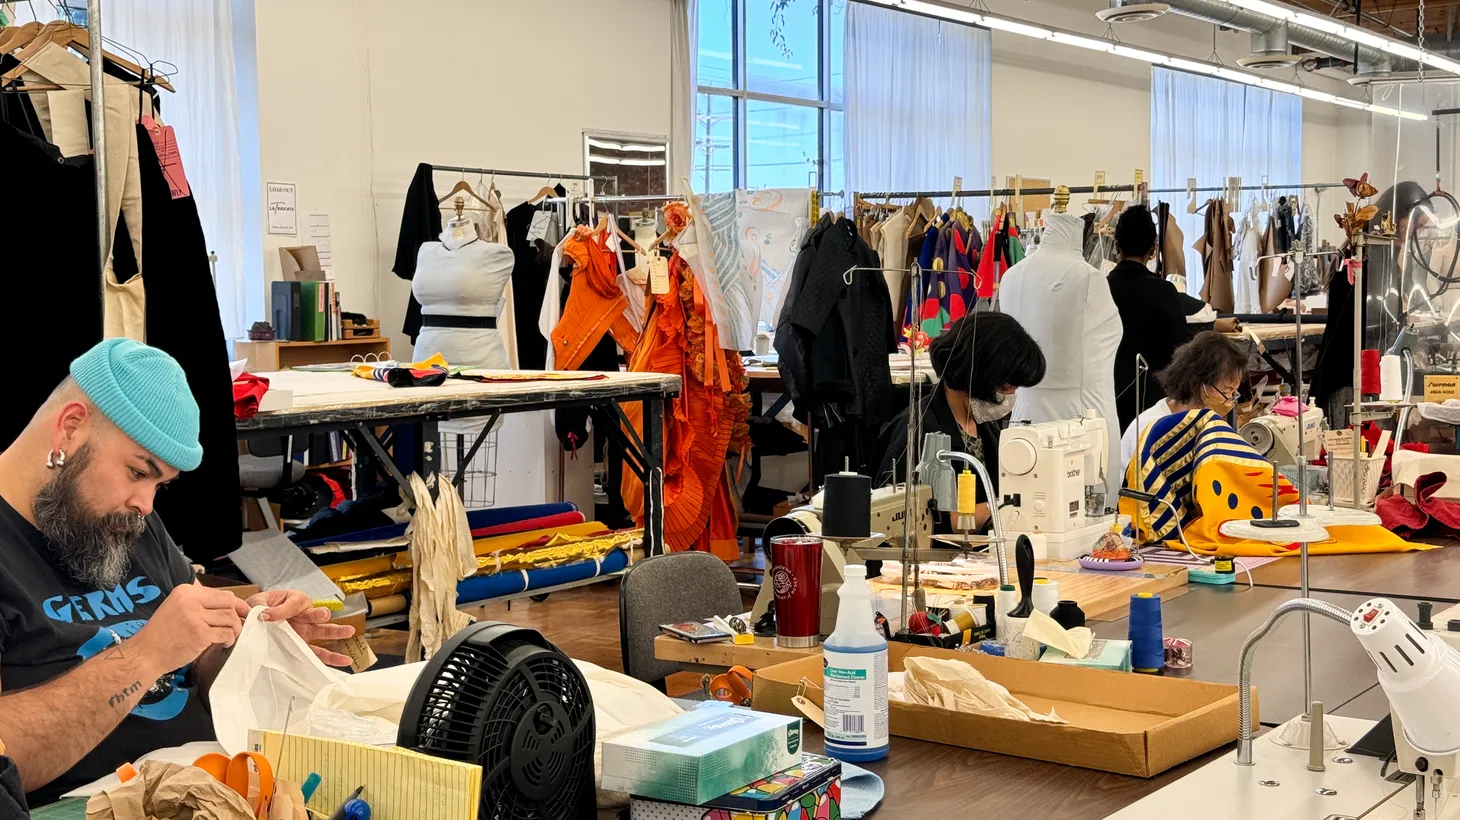 LA Opera’s costume artists spend hundreds of hours on details and fabrication before any notes are sung.